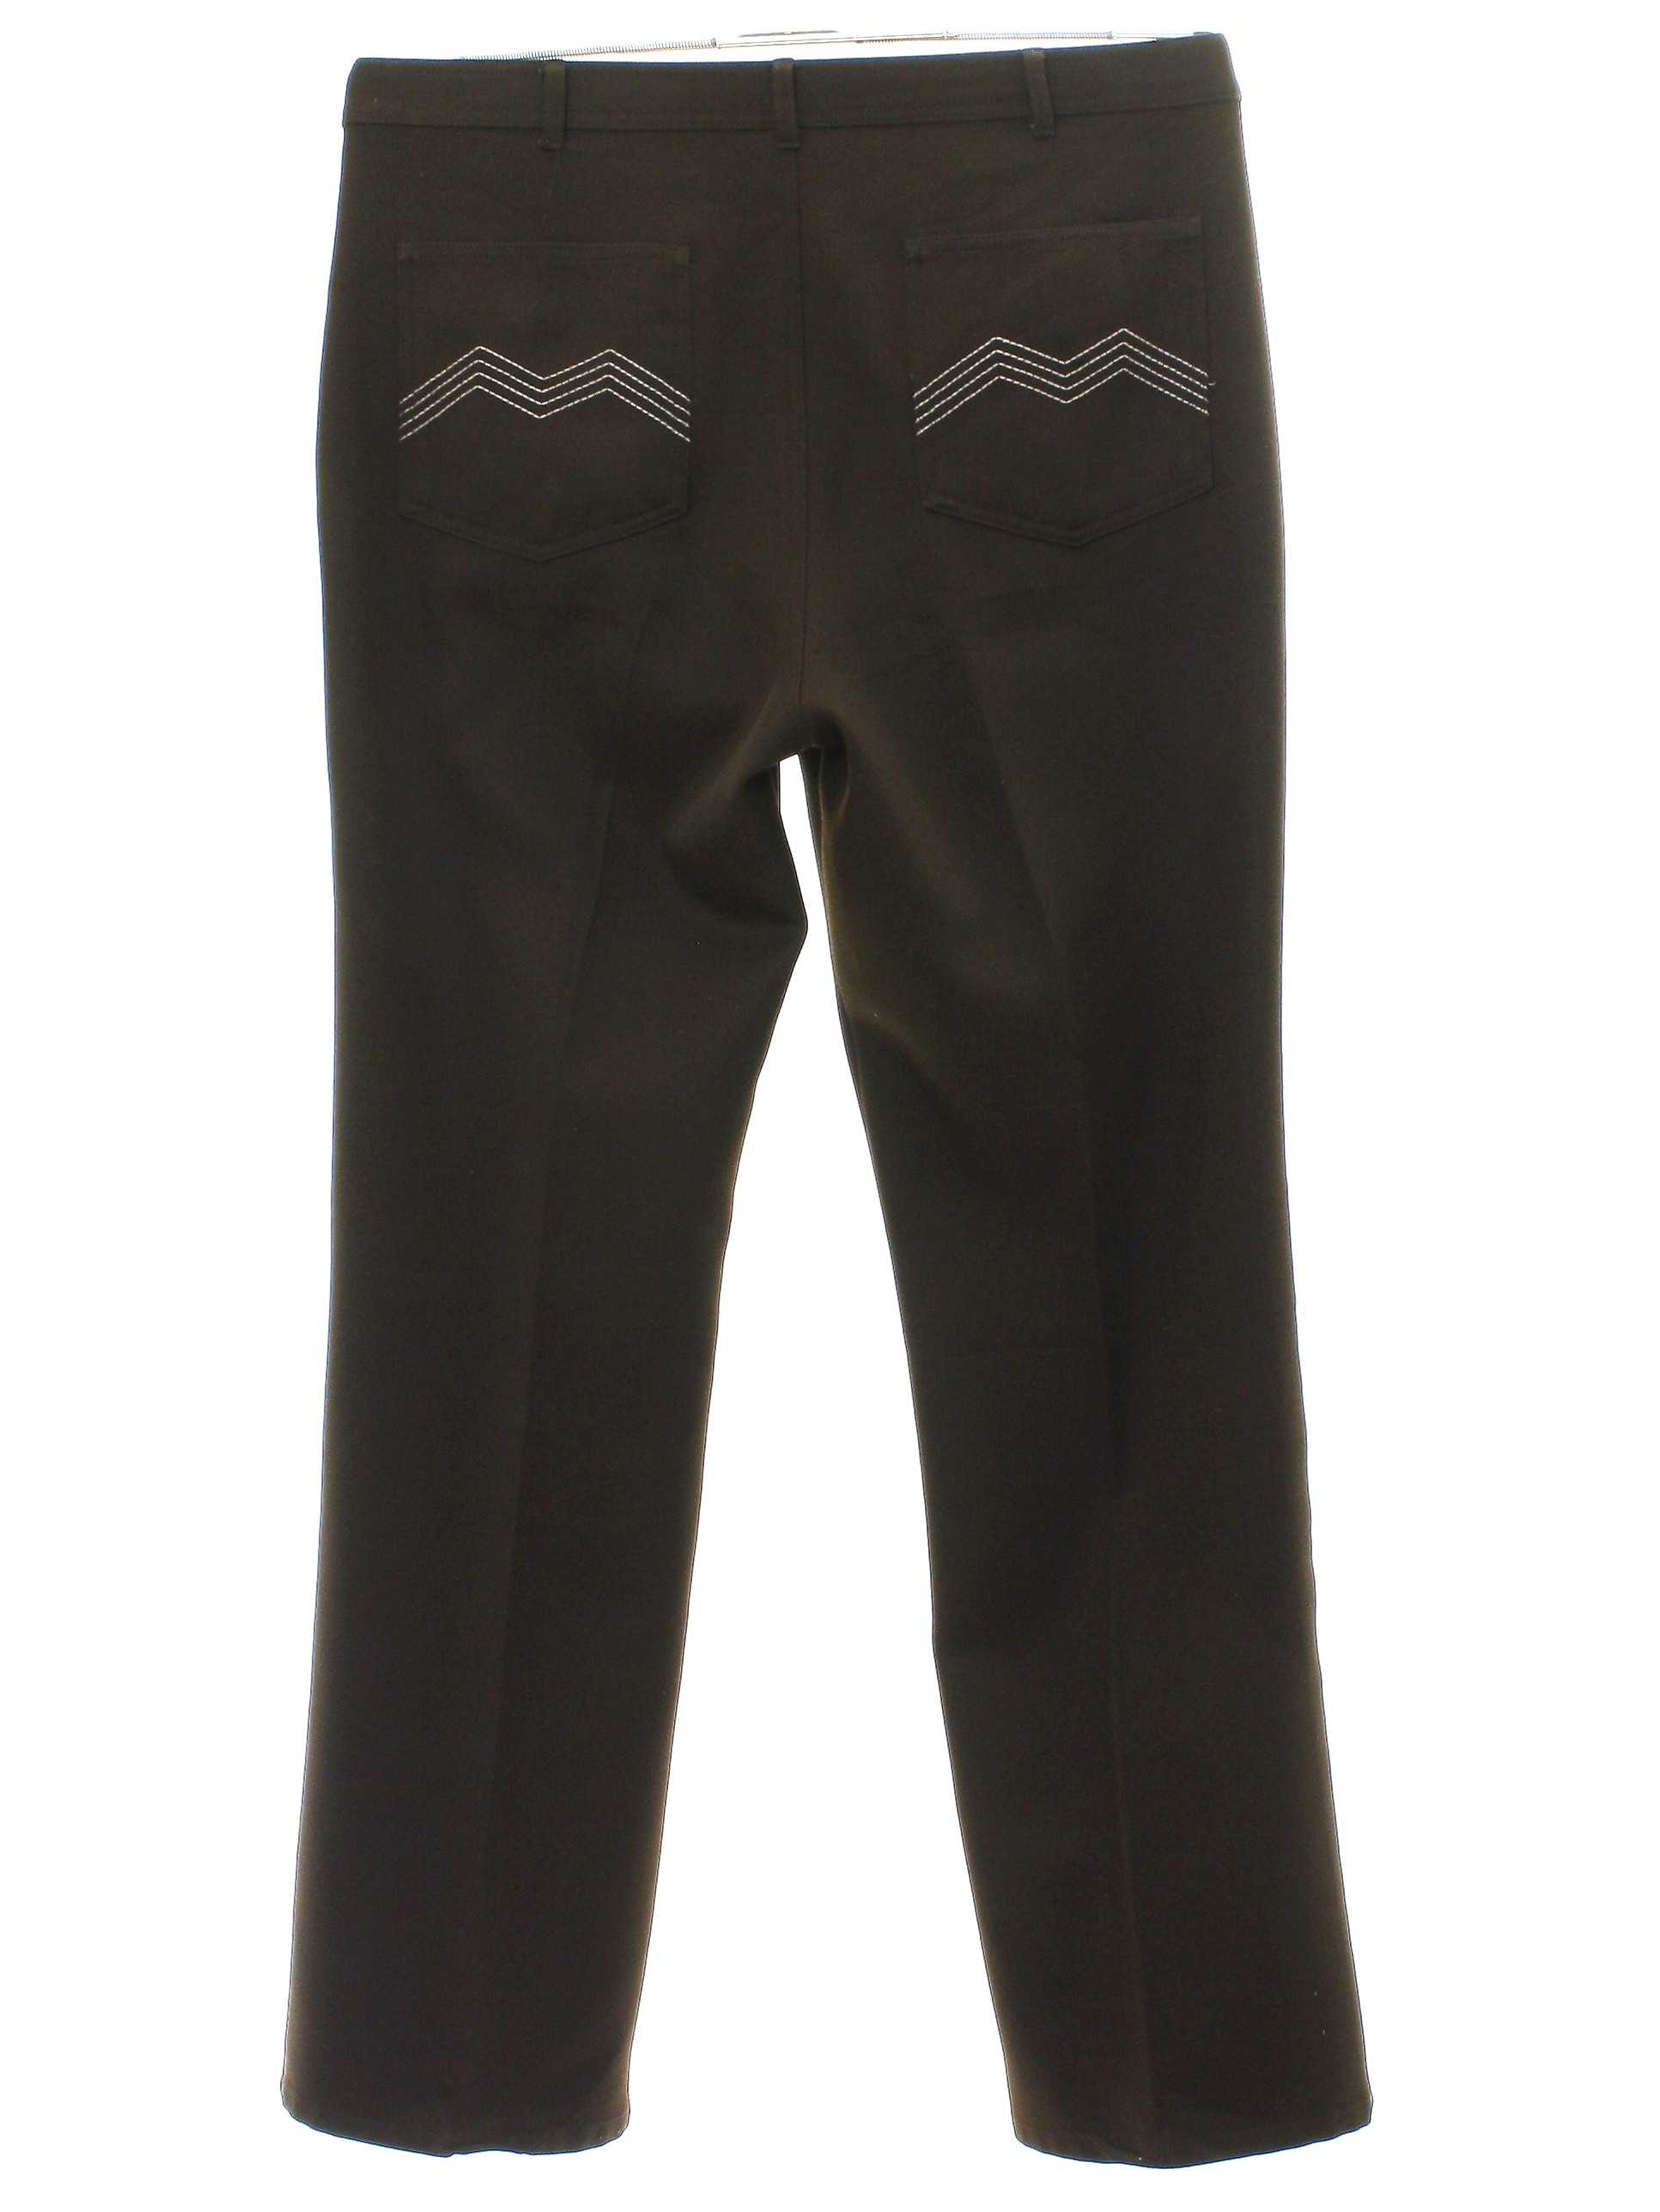 Seventies Flared Pants / Flares: 70s -100 Percent Polyester- Mens dark